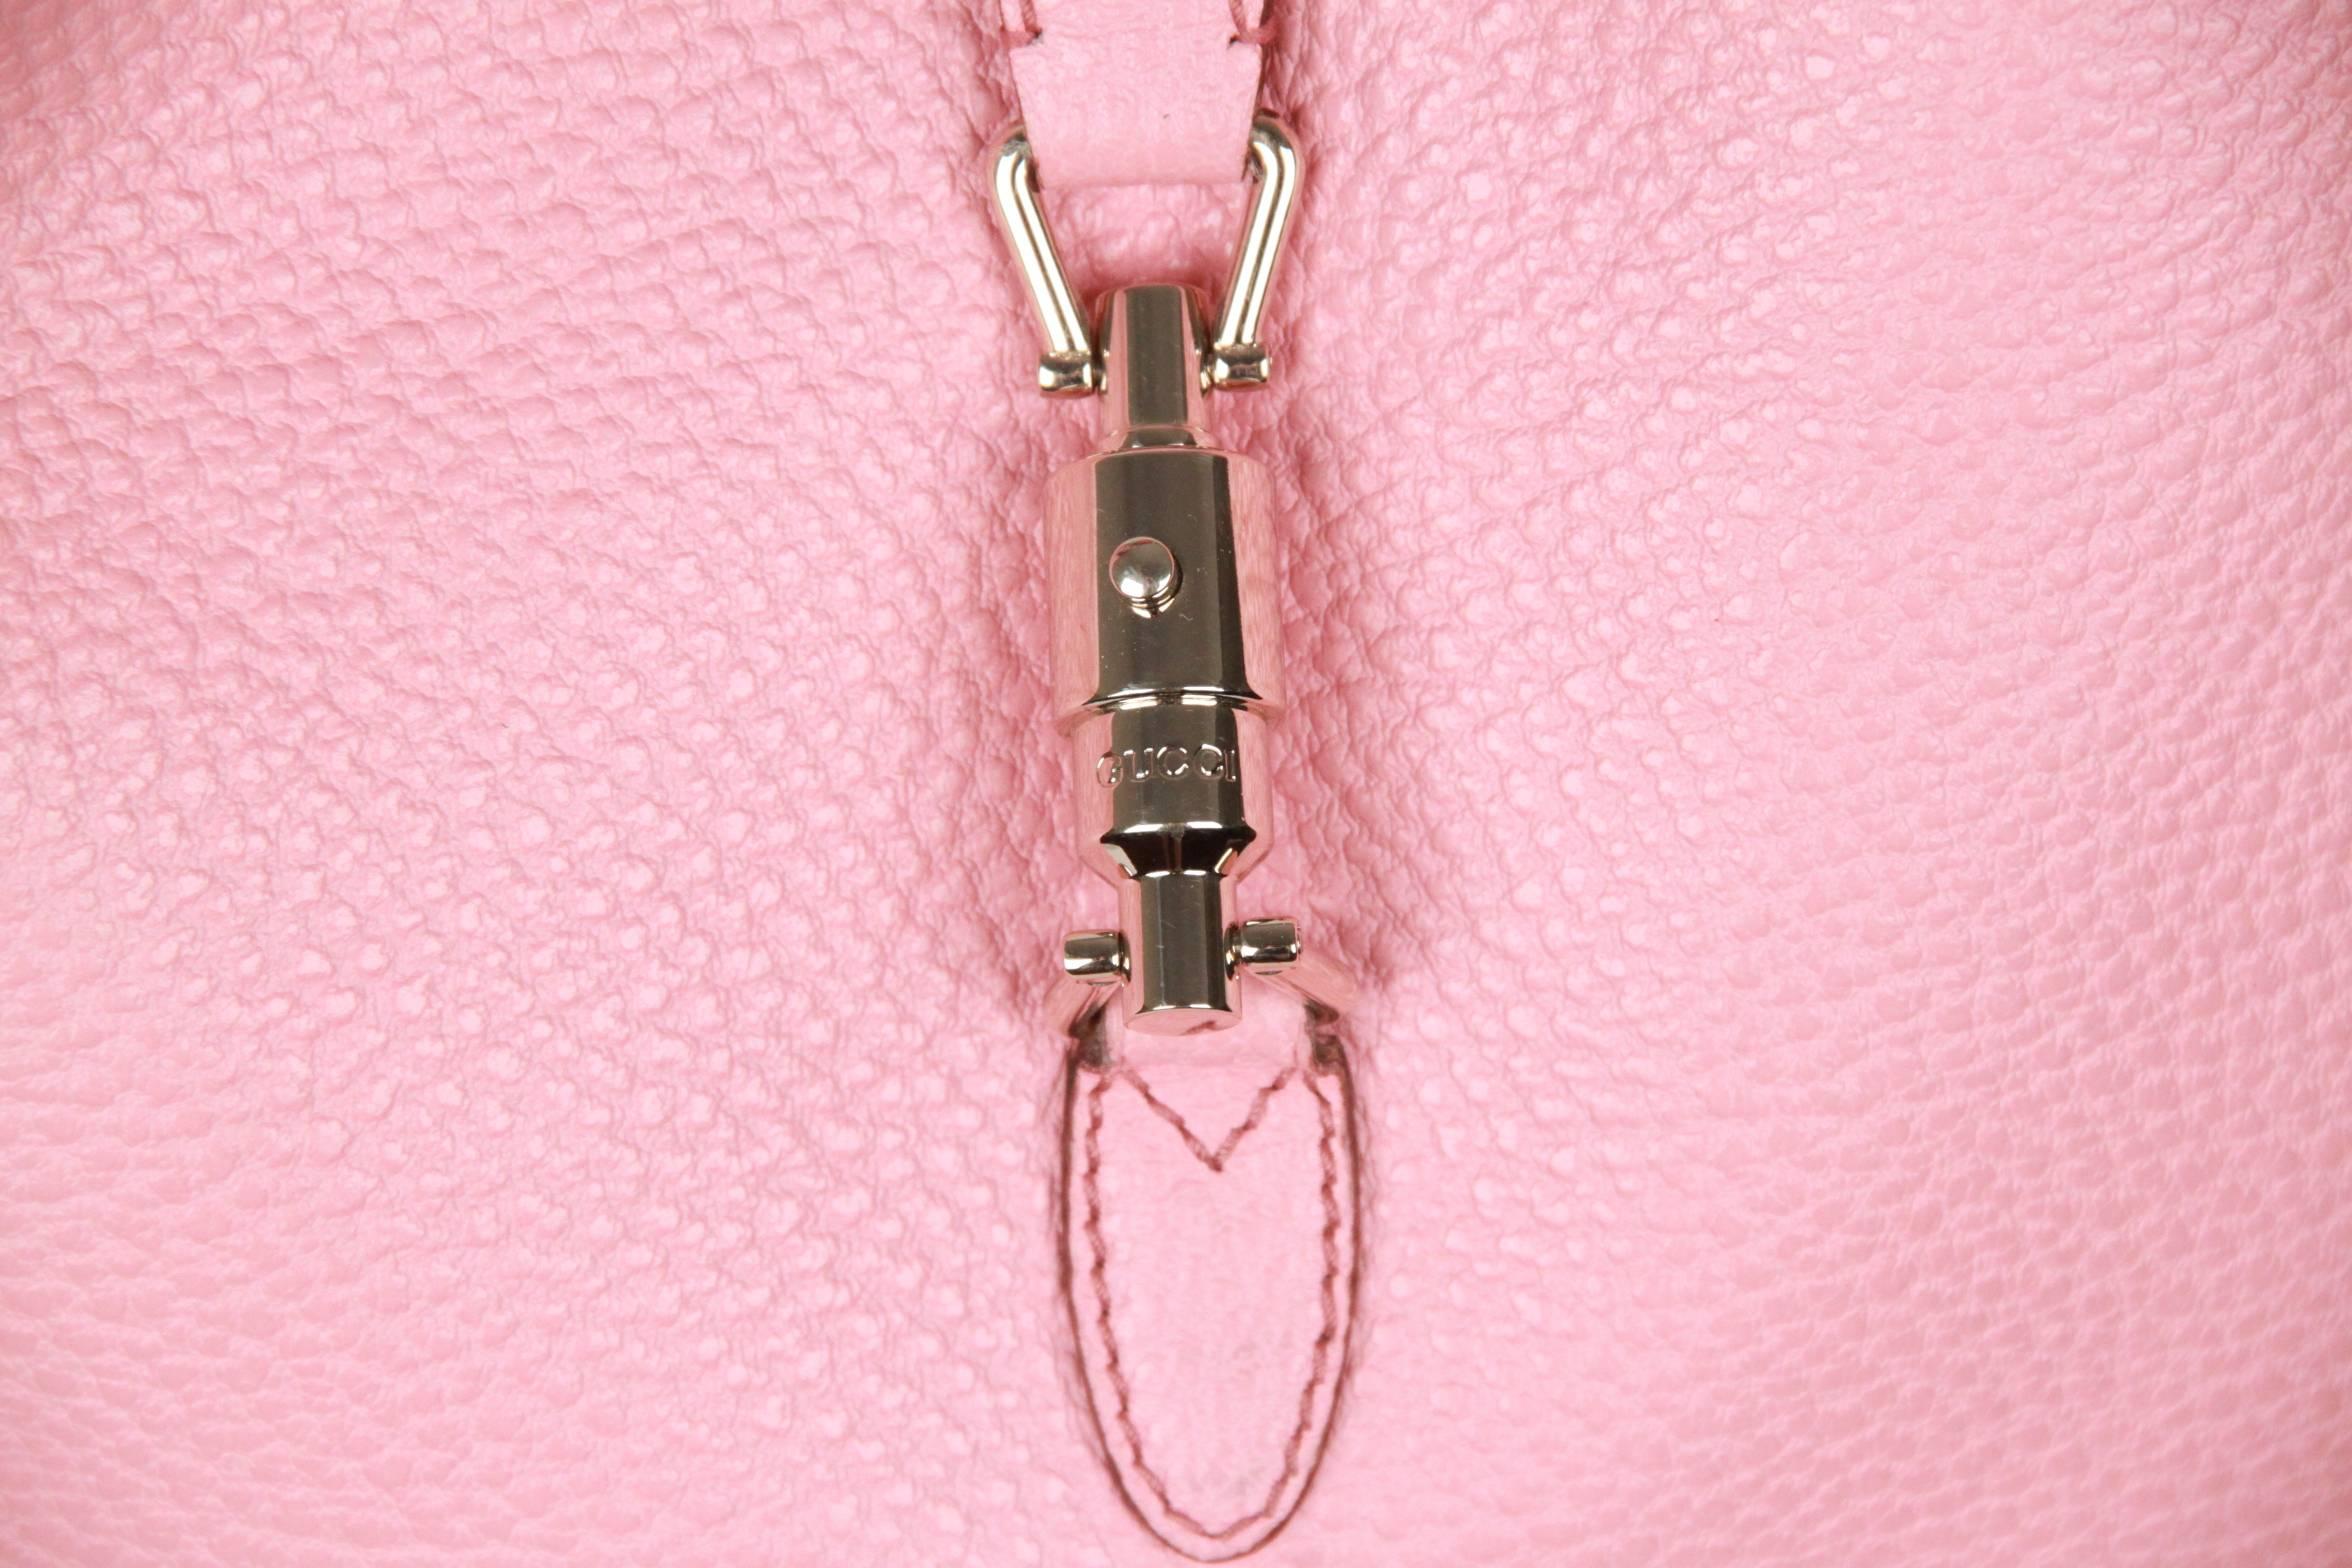 
Classic and stylish is this Gucci Jackie O Hobo pefect for any occasion. Crafted in pebbled pink leather.  The strap it is also embellished with silver toned metal hardware. The single strap is adorned with a silver buckle on the side. A signature